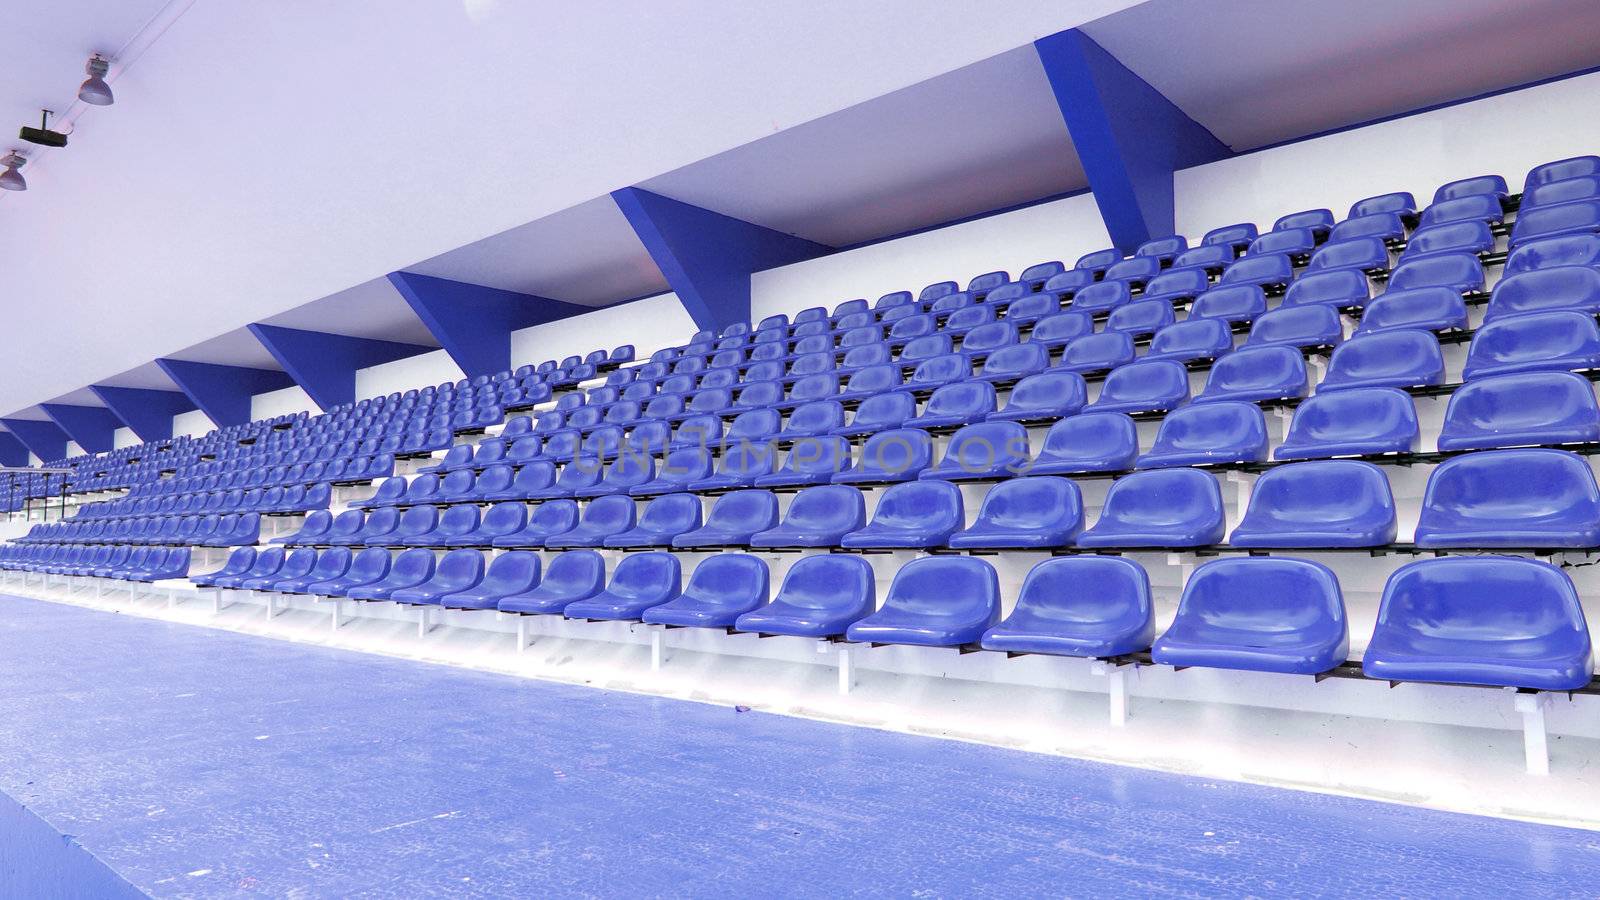 Blue seat at Thep Hasadin Stadium in Thailand by jakgree